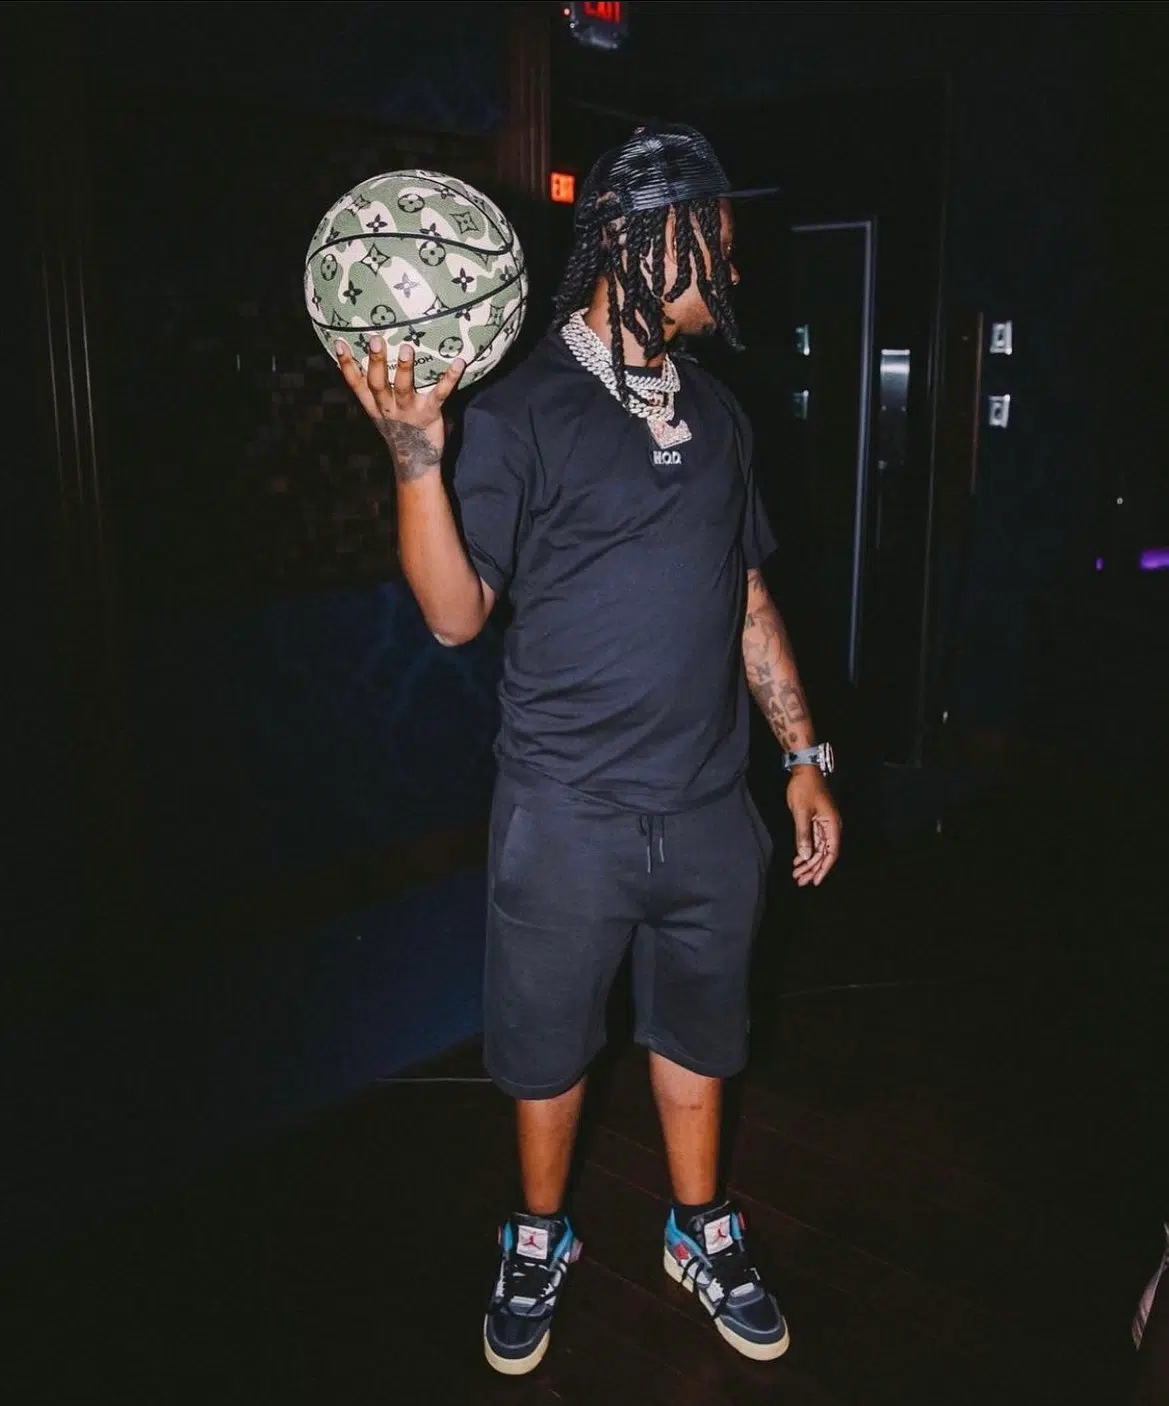 Lil wayne holding a basketball in his hands.